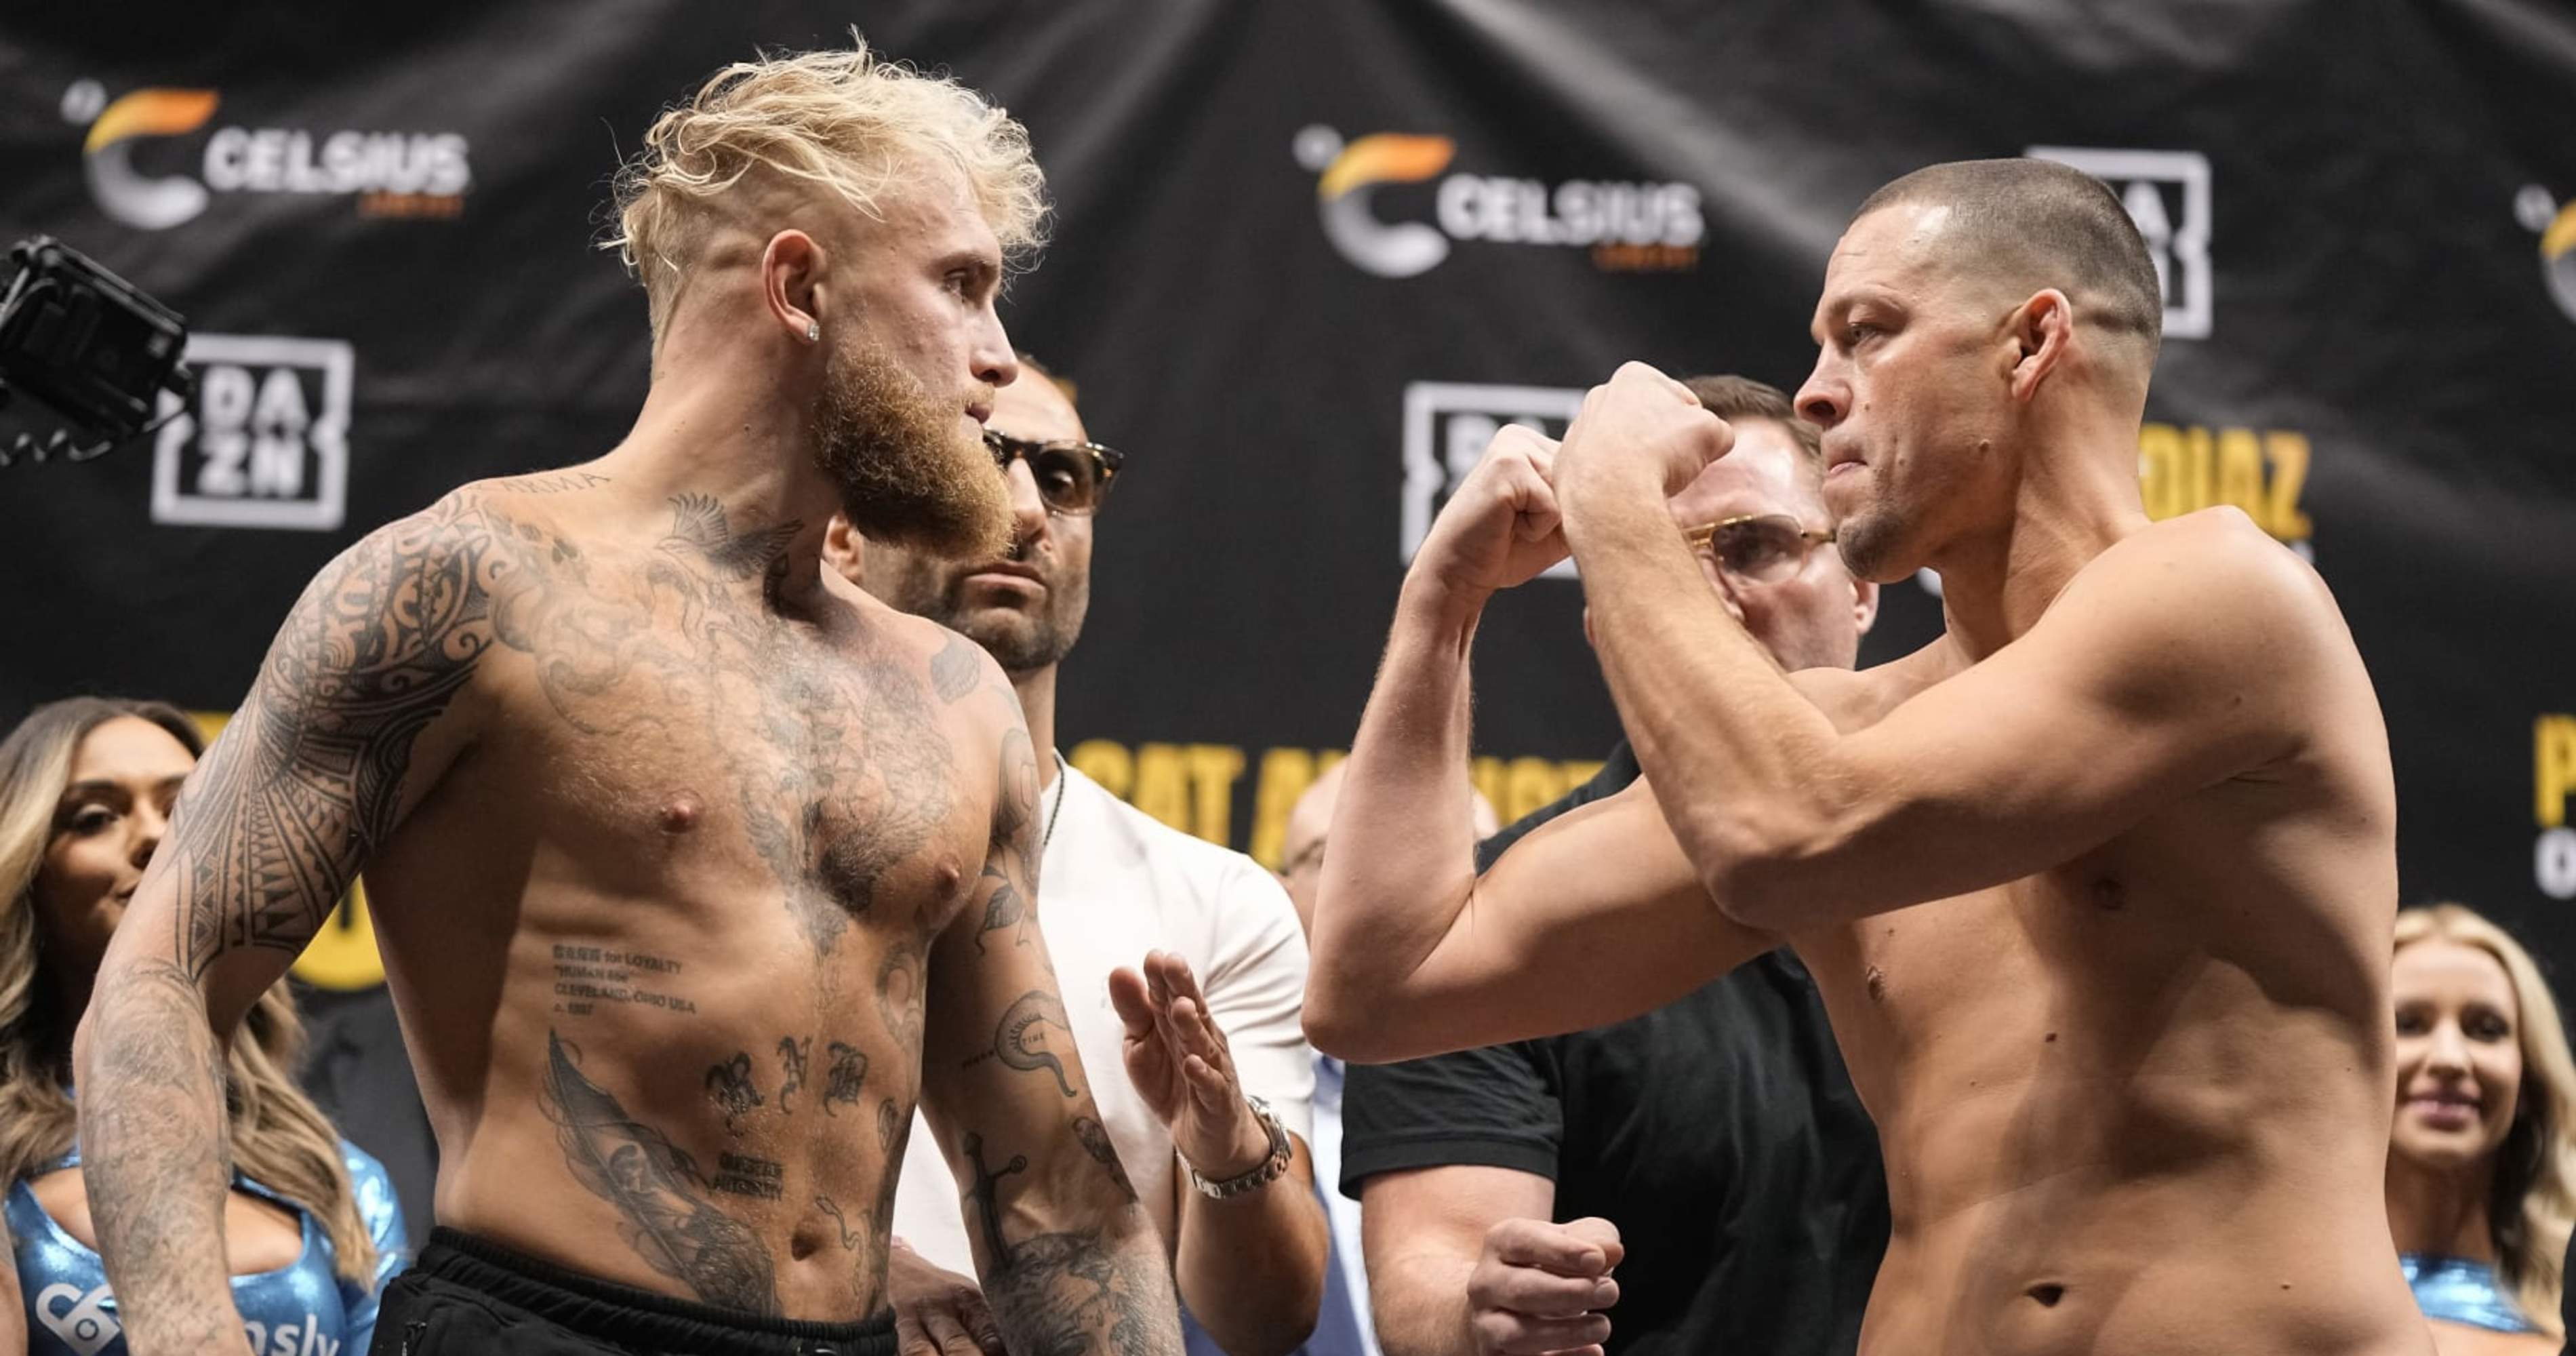 Jake Paul Defeats Nate Diaz By Unanimous Decision In Dominant 